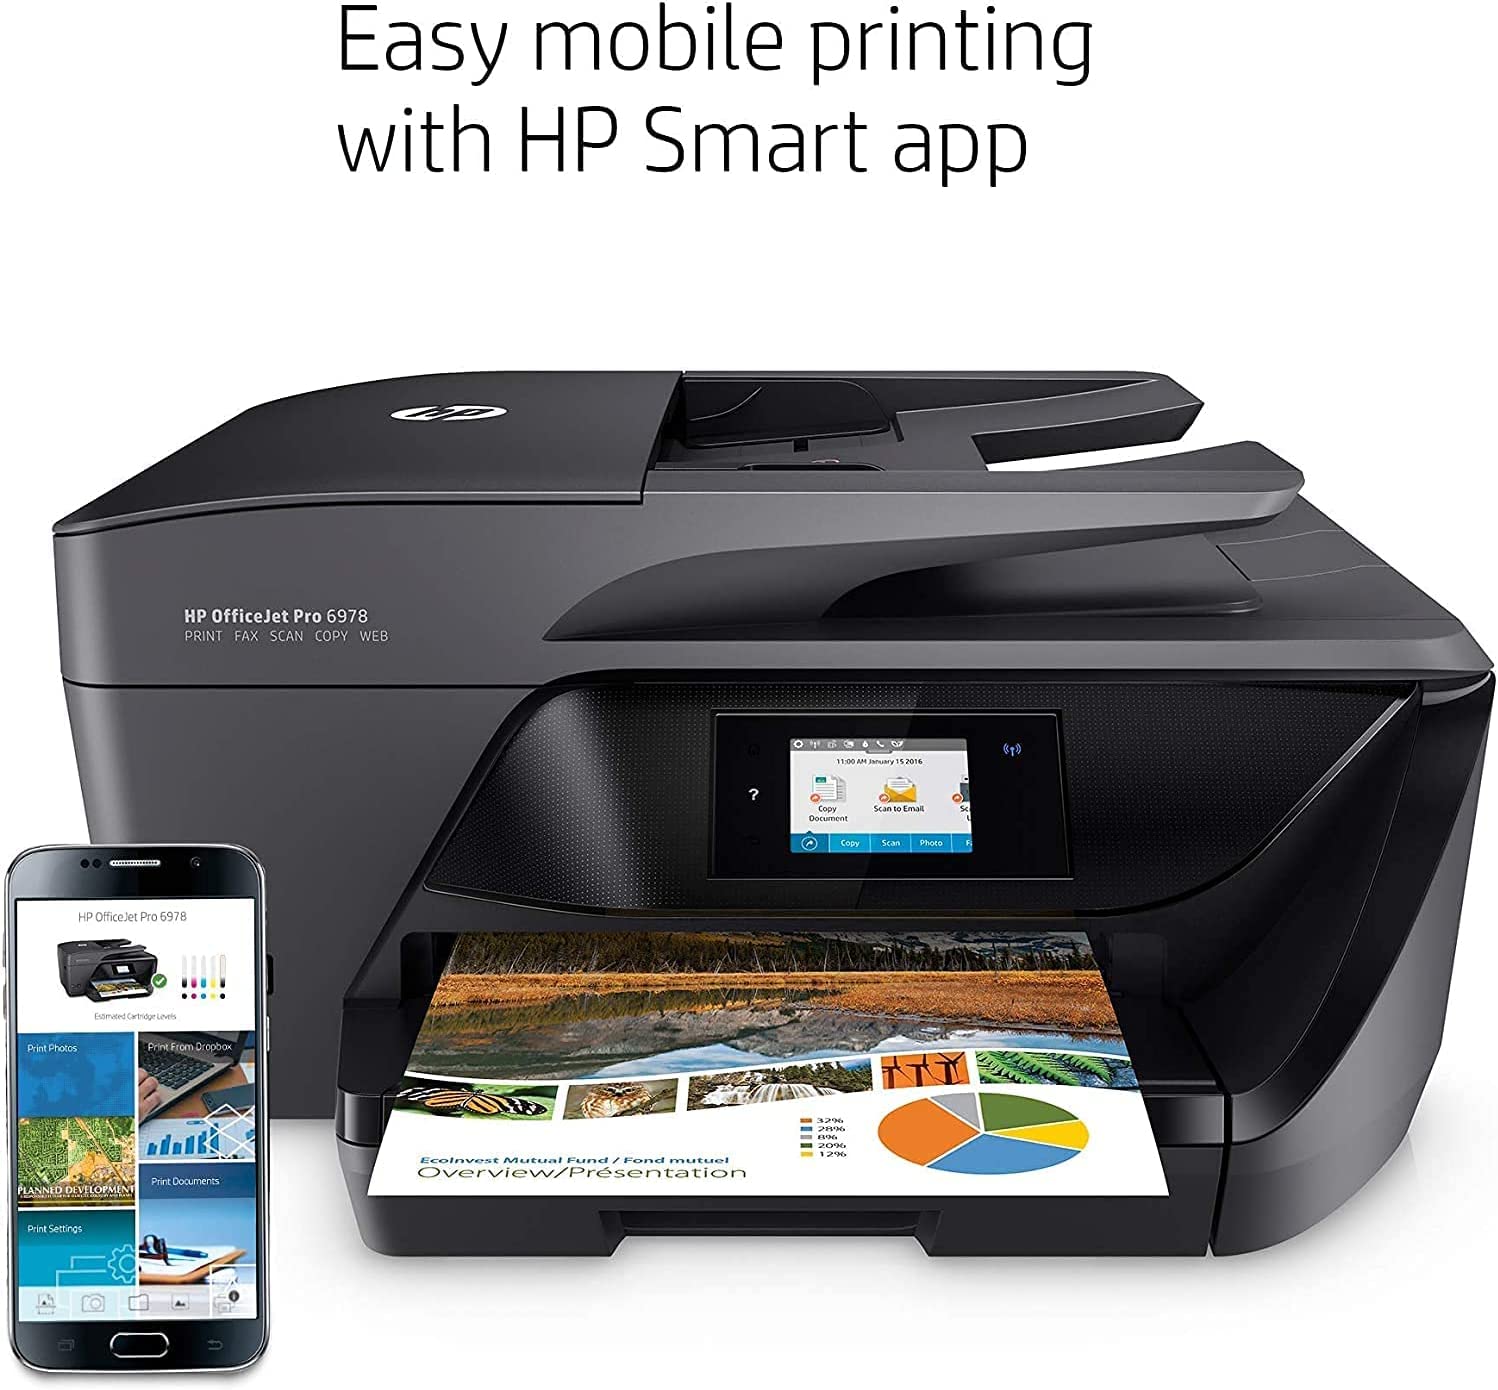 HP OfficeJet Pro 6978 All-in-One Wireless Printer, Copier, Scanner, Fax, Duplex 2-Sided Printing, Instant Ink, Compatible with Alexa, with XPI USB Printer